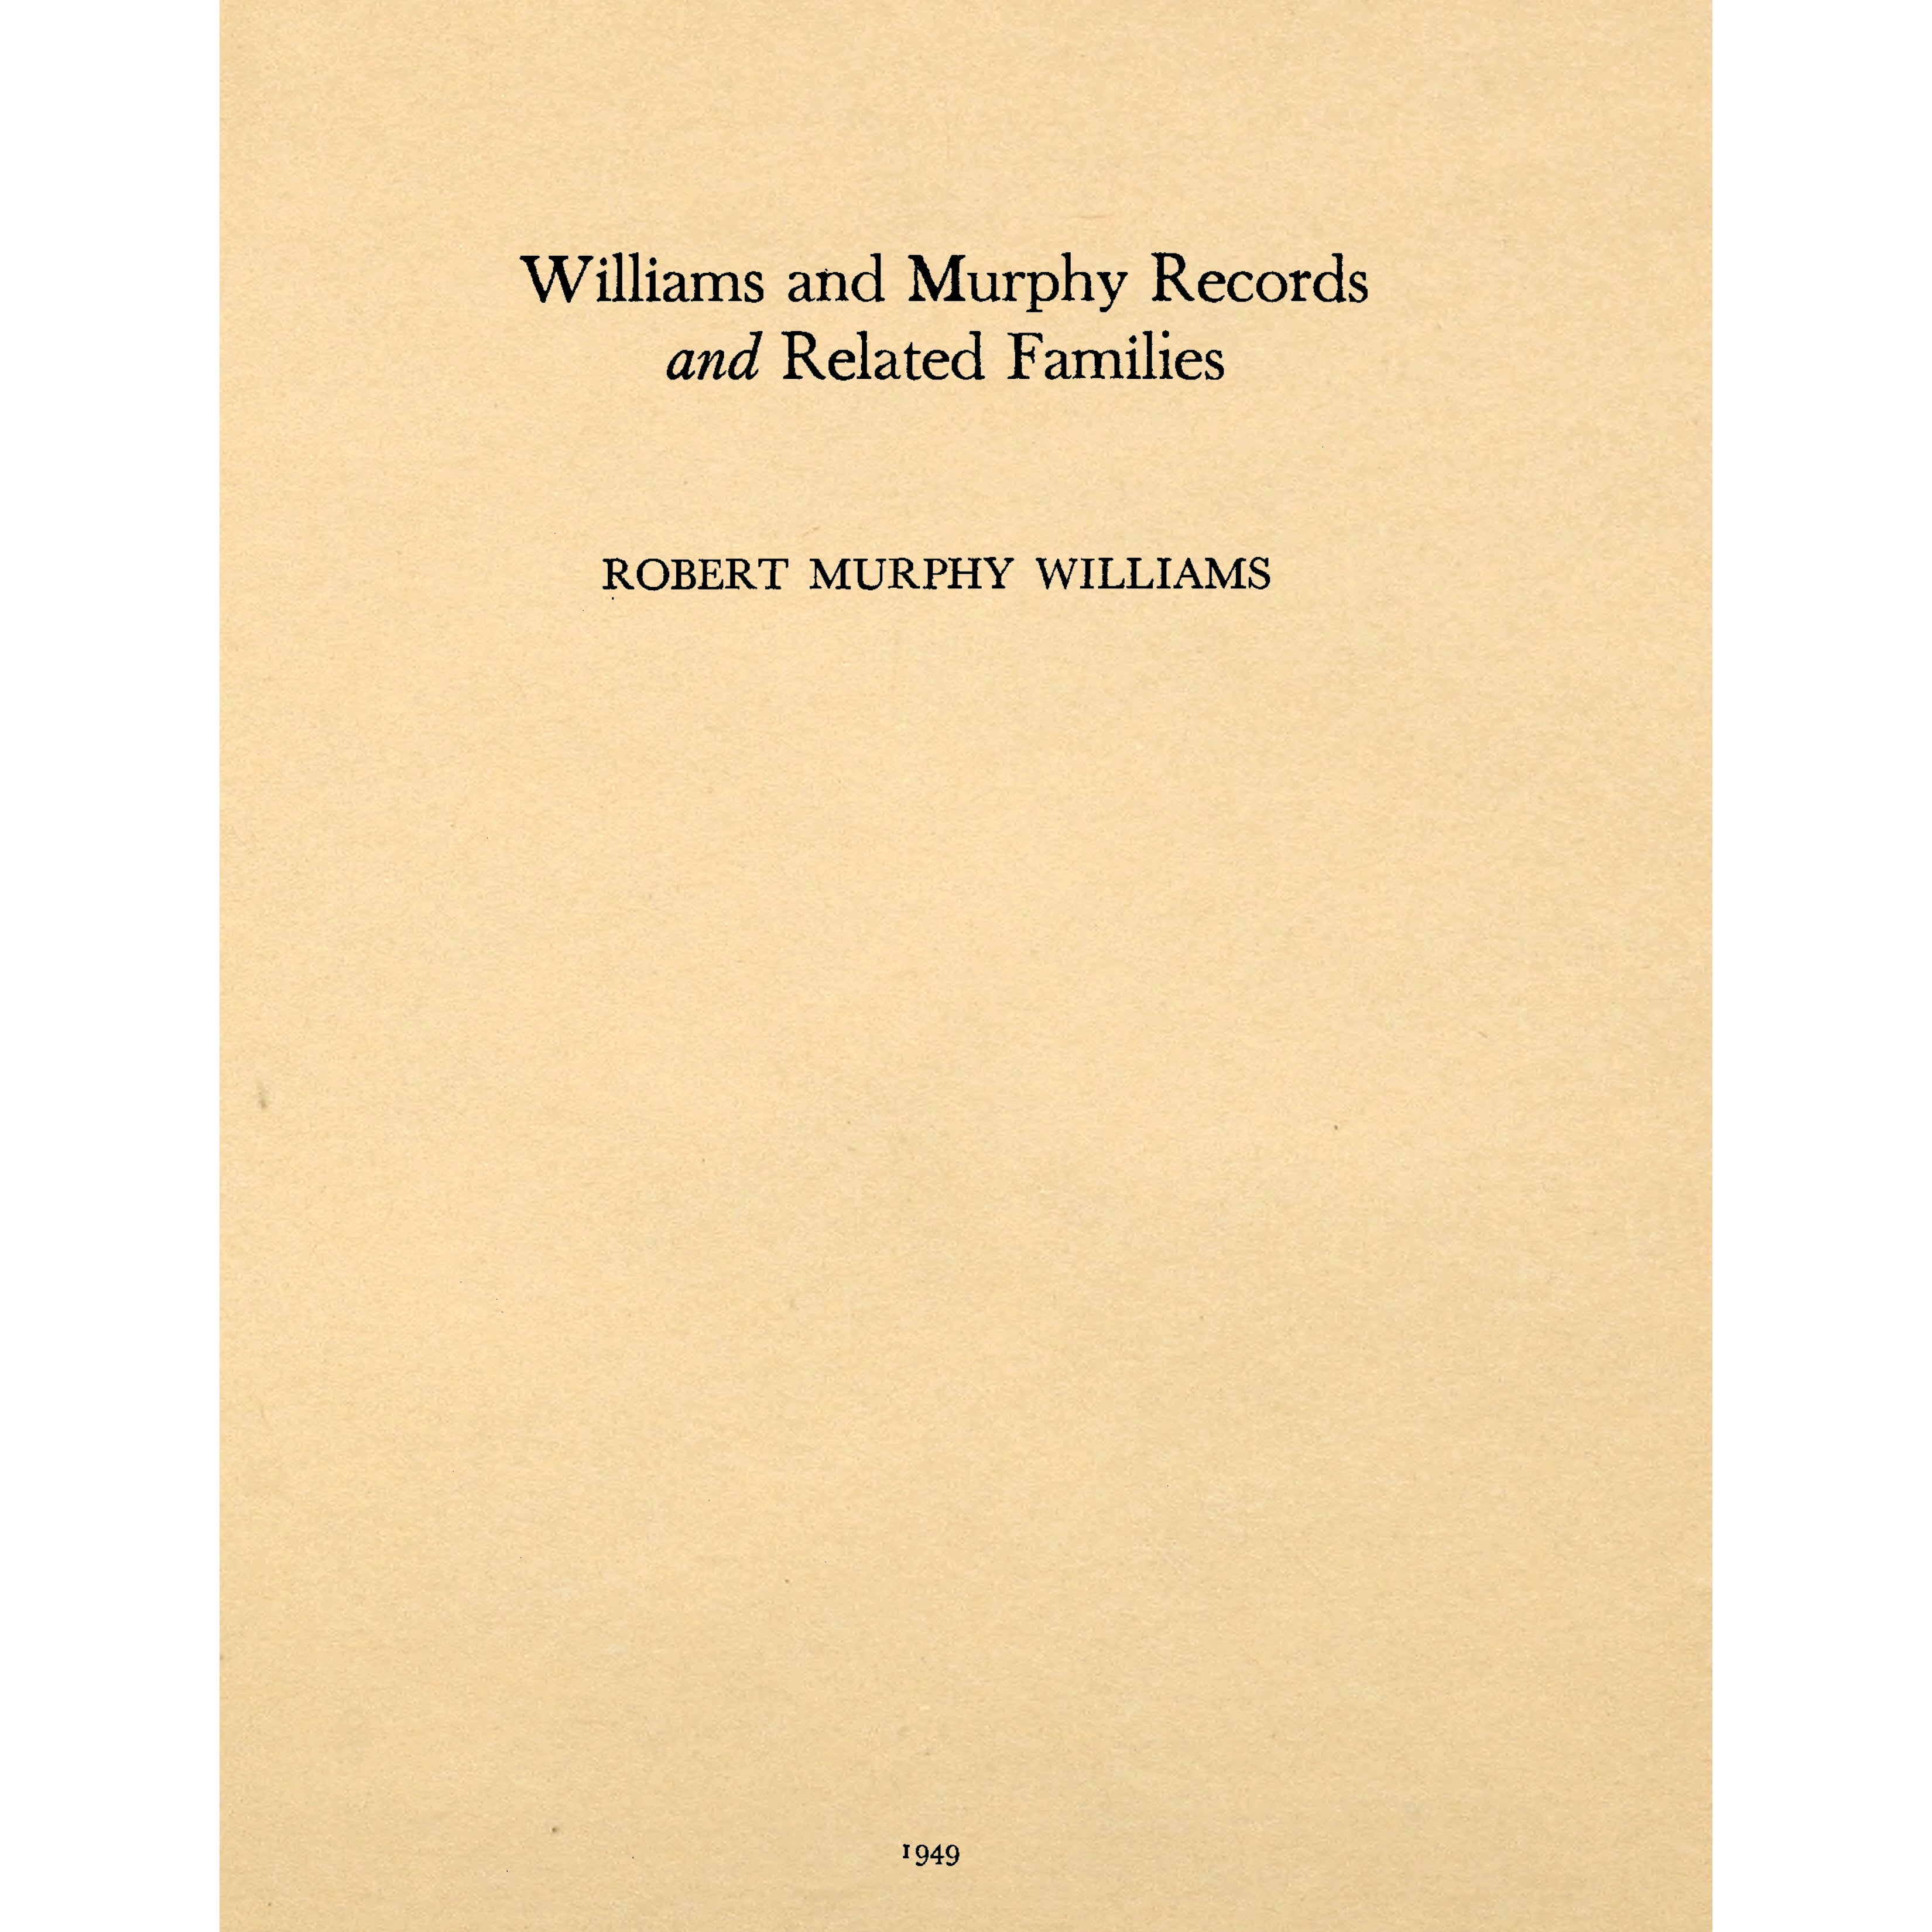 Williams and Murphy Records and Related Families